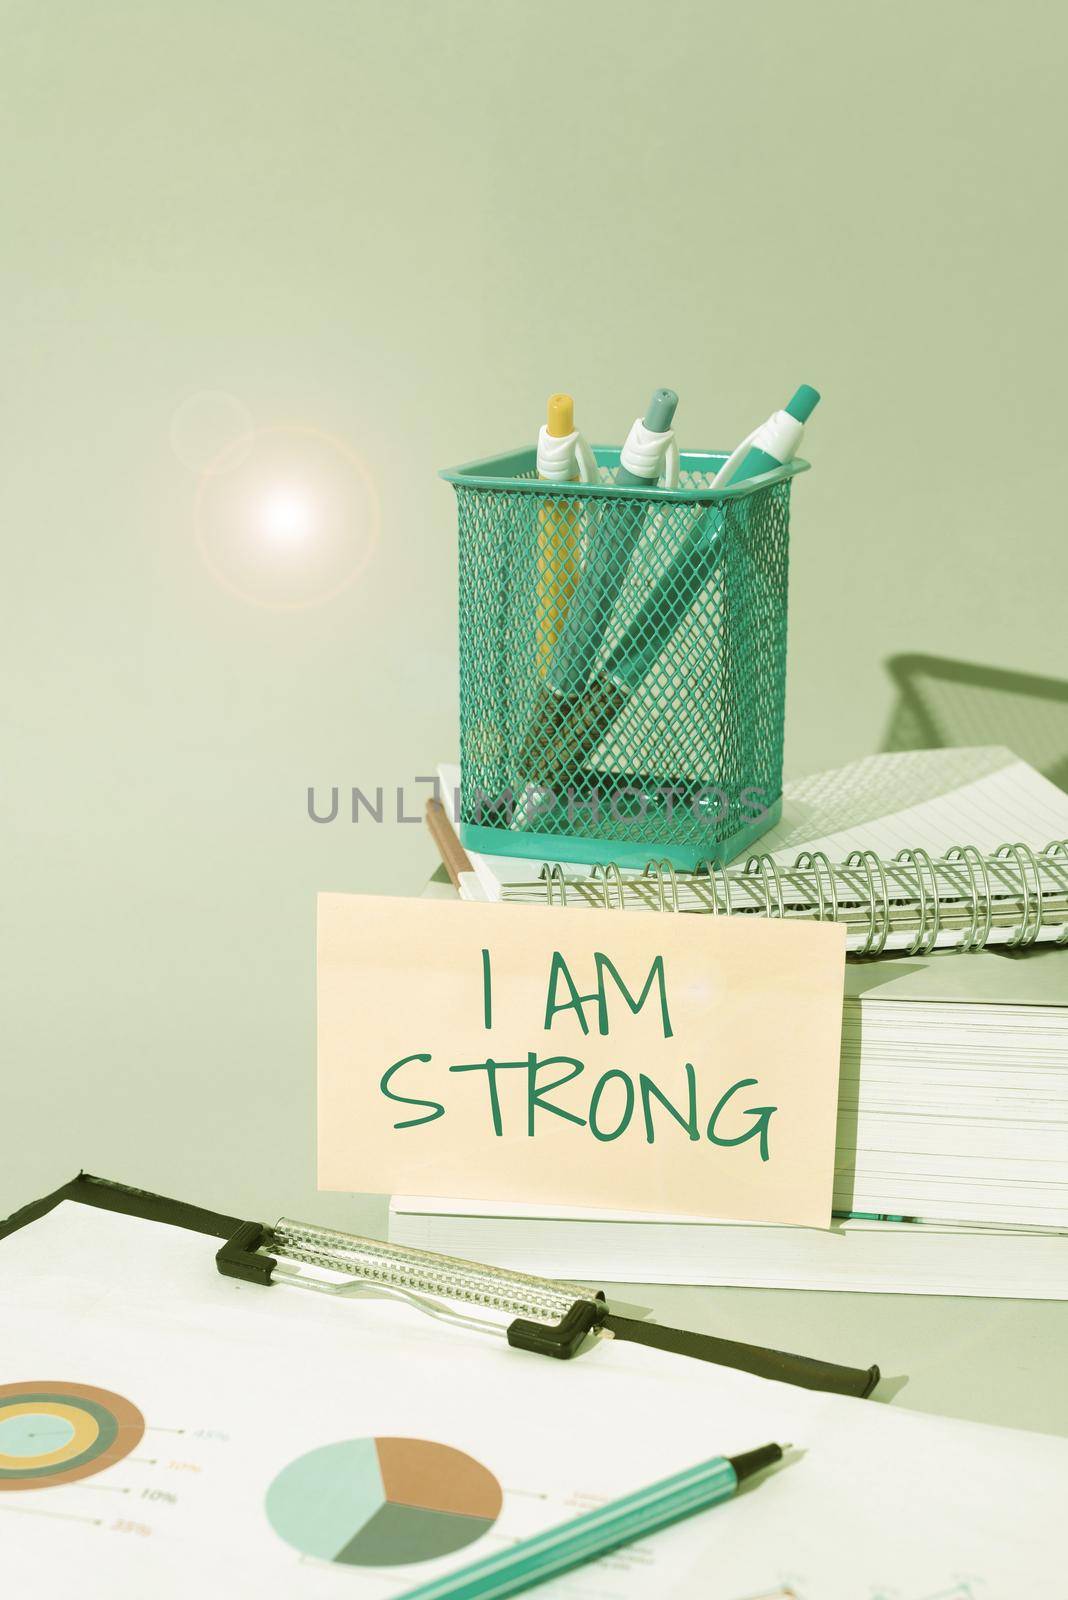 Conceptual display I Am Strong, Conceptual photo Have great strength being healthy powerful achieving everything Important Messages Presented On Presentation Board With Arrows Up Around.